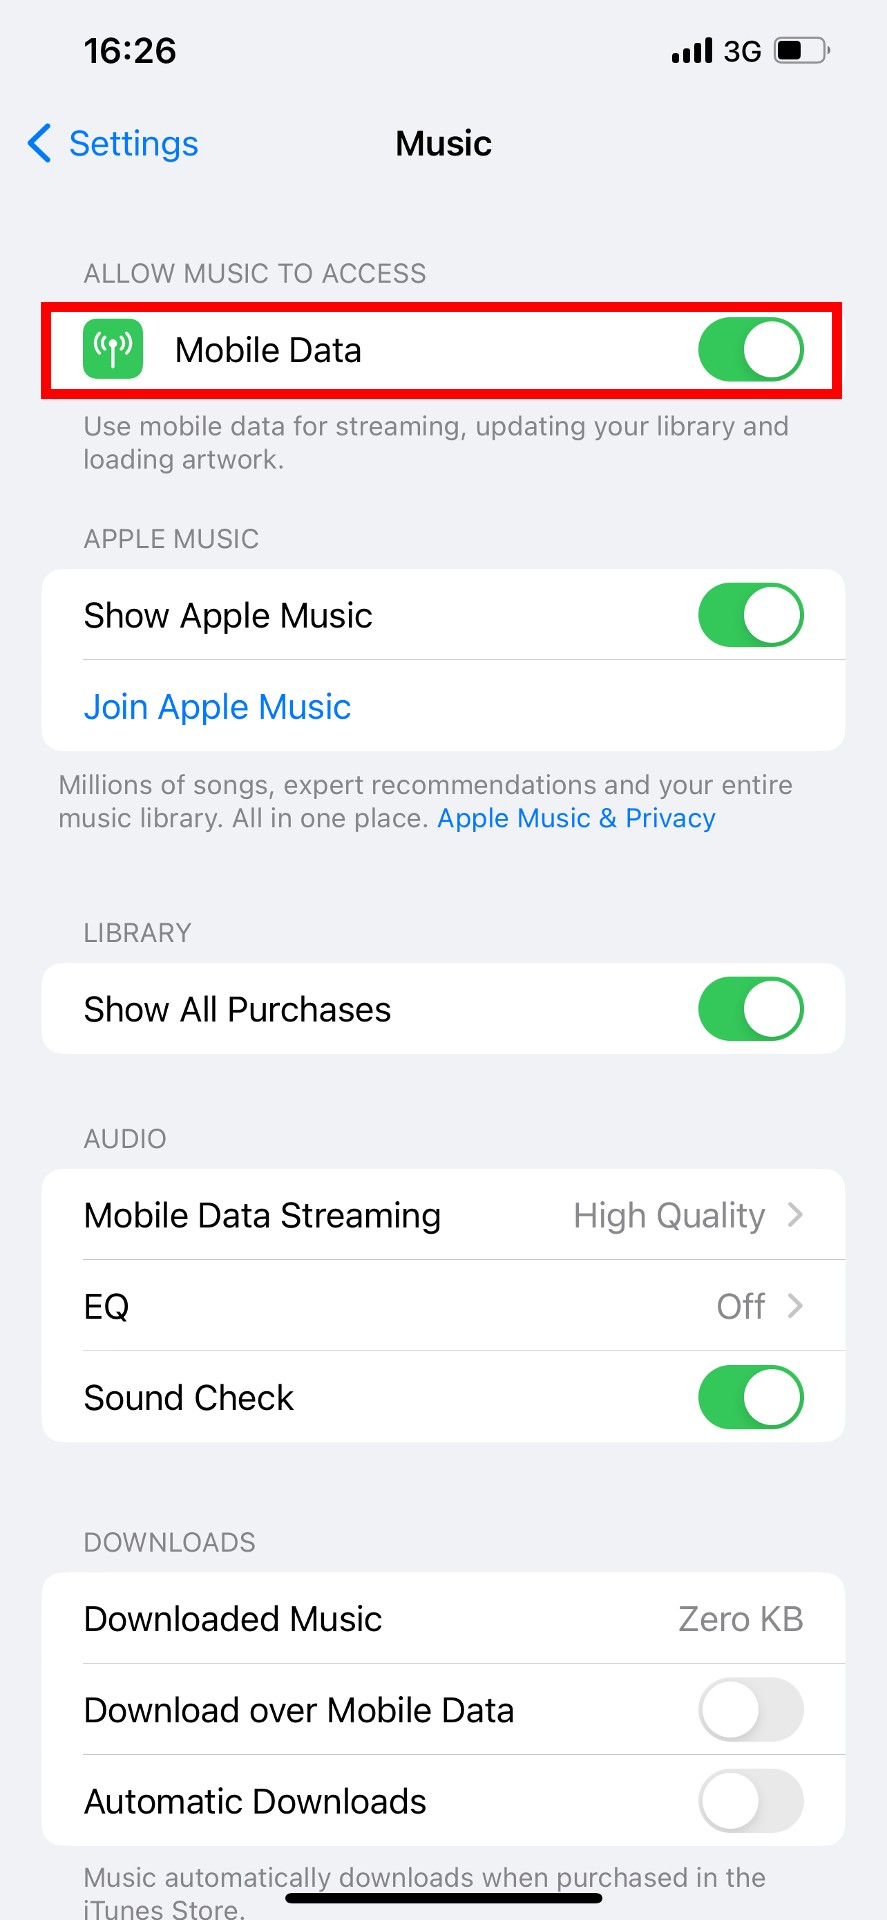 iOS Music settings with "Mobile Data" highlighted